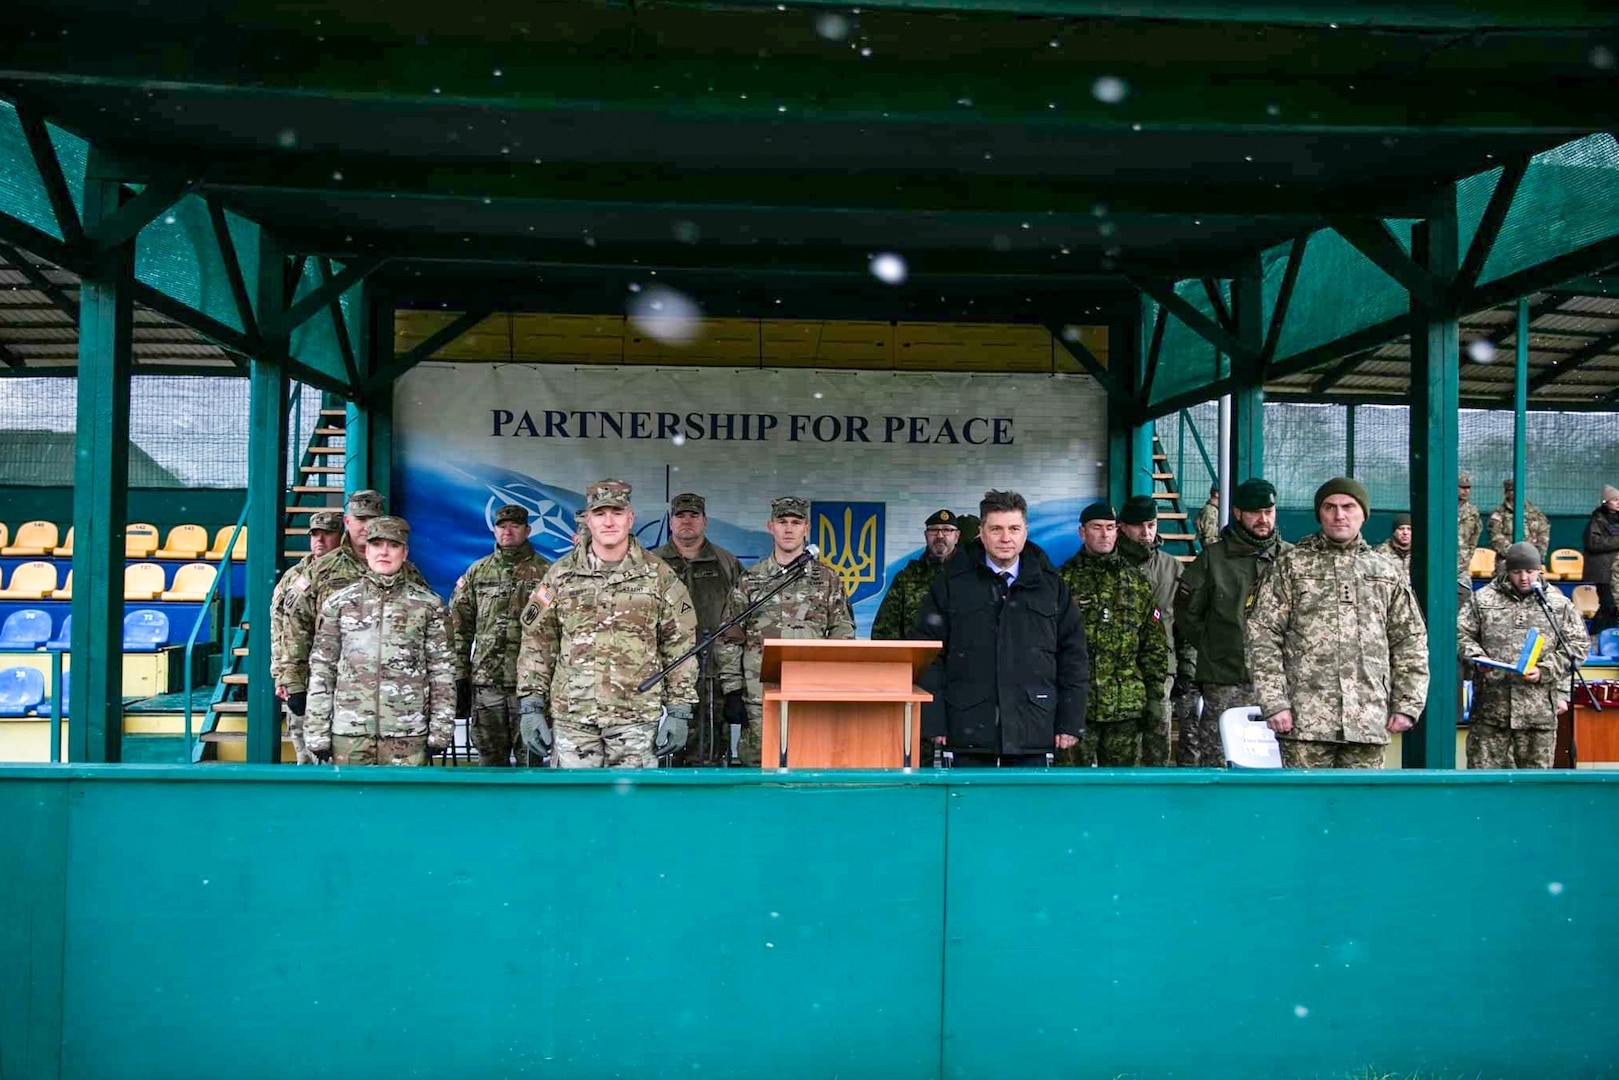 Nov. 30, 2021, marked the official transfer of authority of the Joint Multinational Training Group - Ukraine mission from the Washington National Guard’s 81st Stryker Brigade Combat Team, known as Task Force Raven, to the Florida National Guard’s 53rd Infantry Brigade Combat Team, known as Task Force Gator. The 81st left a lasting impact on our Ukrainian partners and on the mission as a whole.